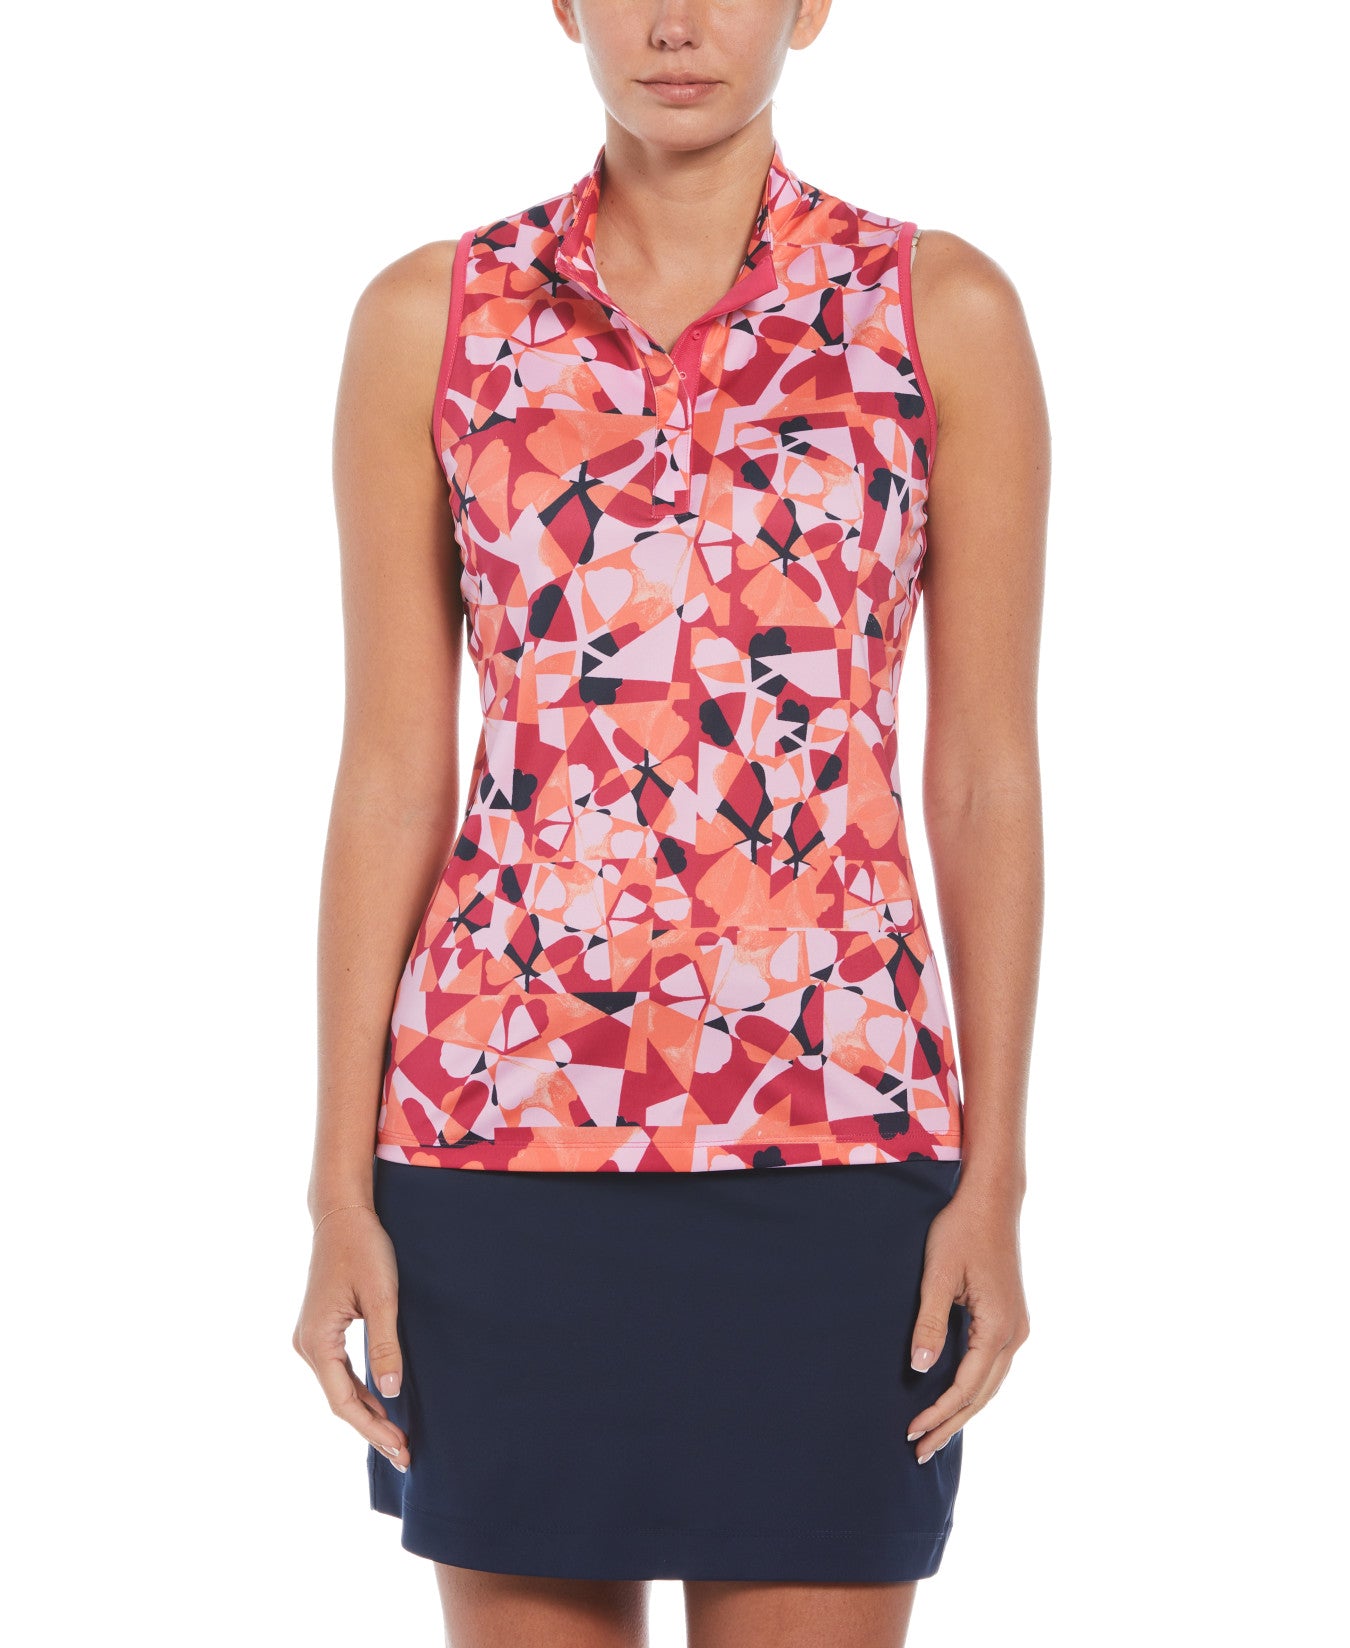 View Womens Geometric Floral Print Golf Shirt With Snap Placket In Pink Pe information